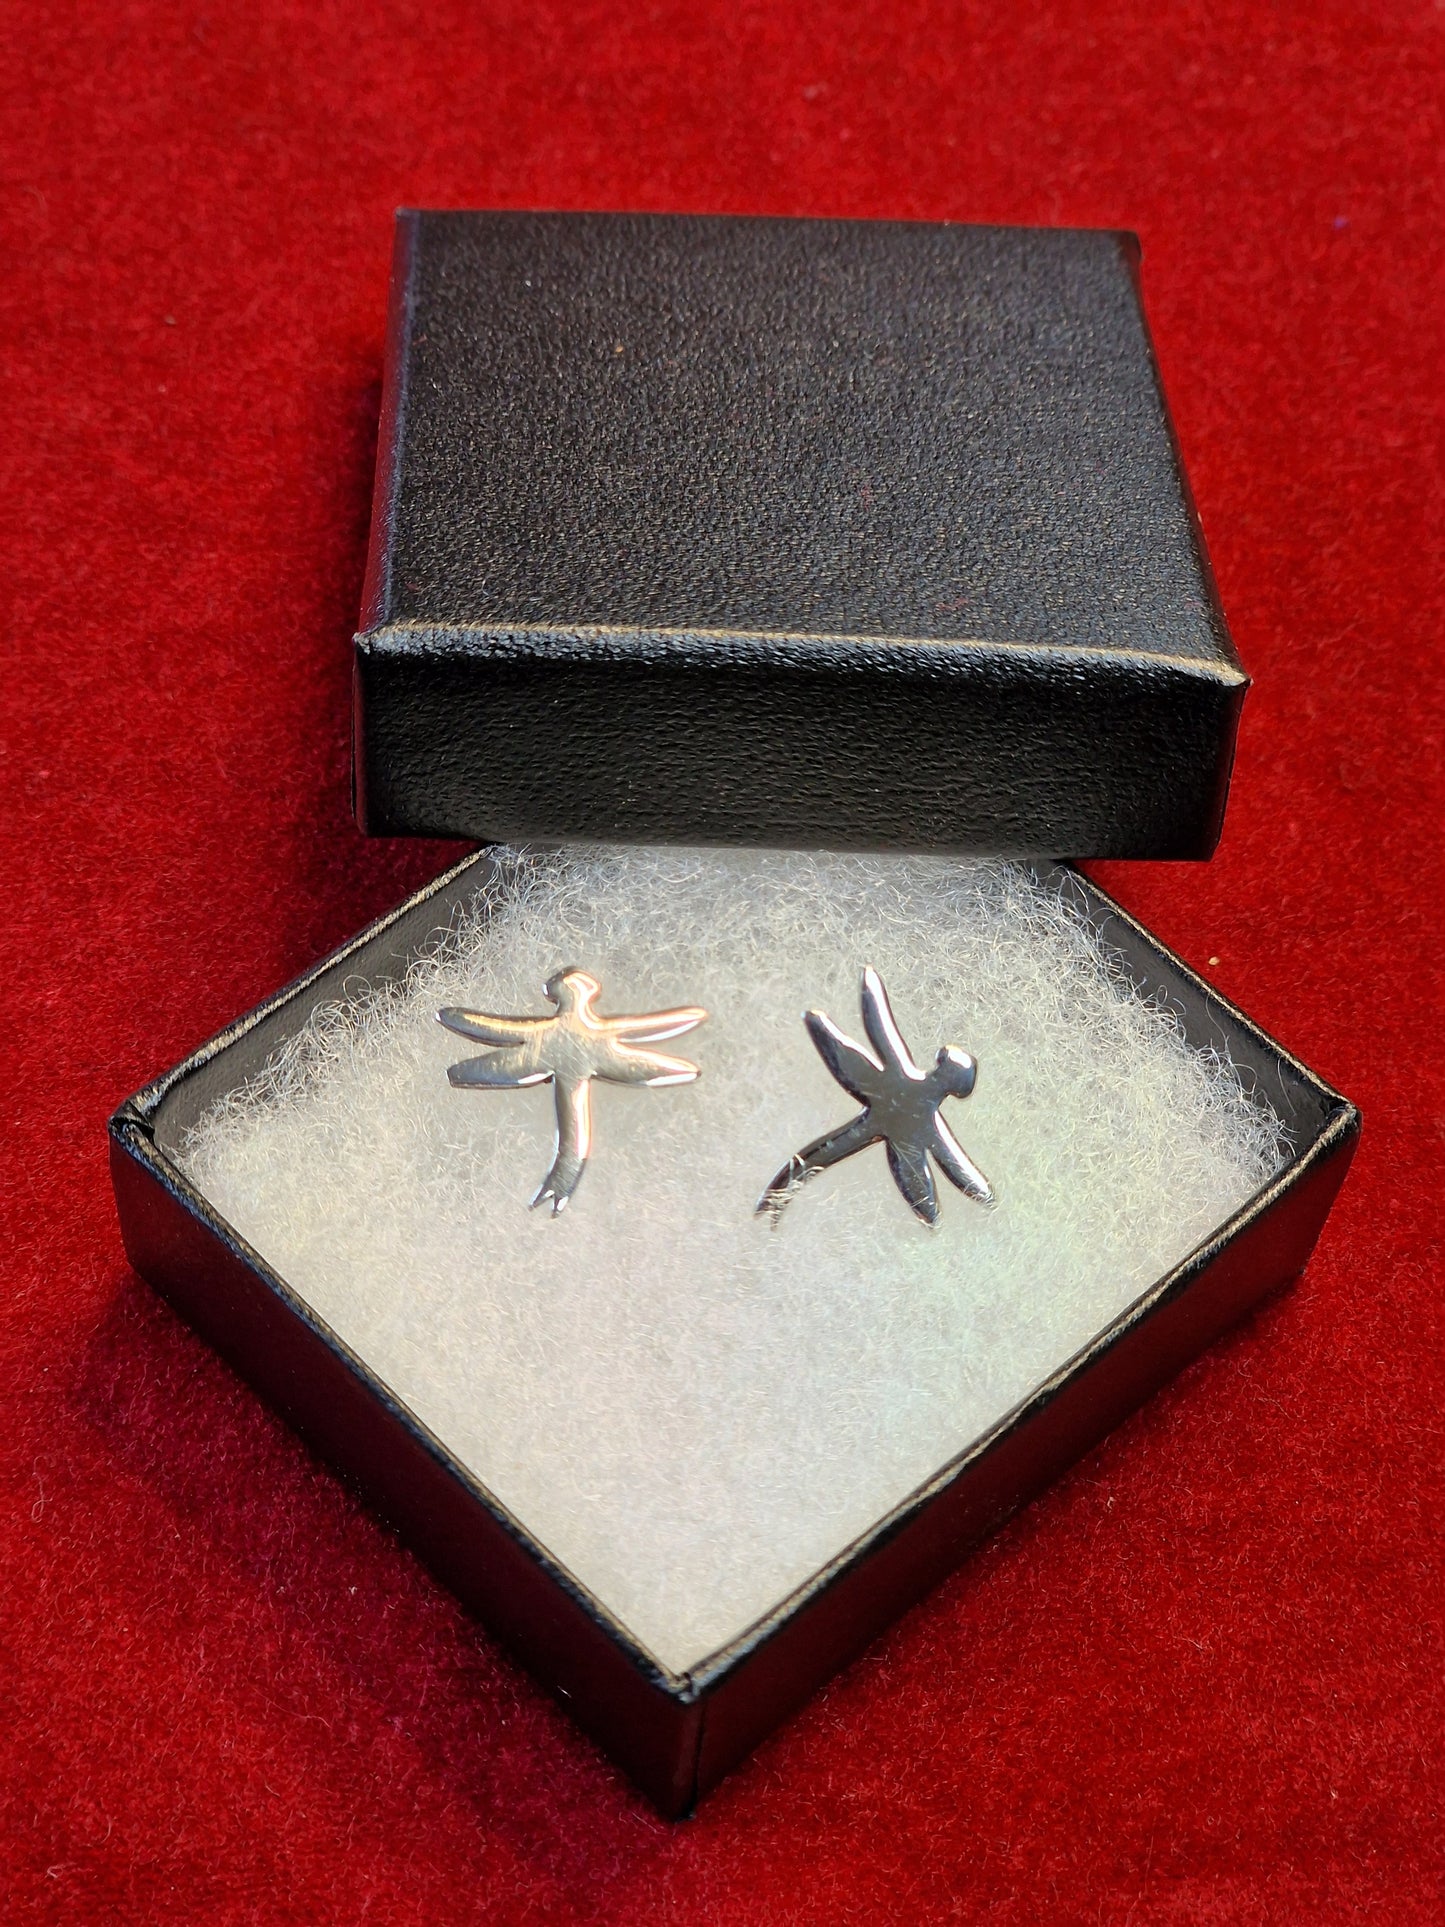 Dragonfly earrings, hand made by Brenton West with .925 and CBW stamped on reverse.